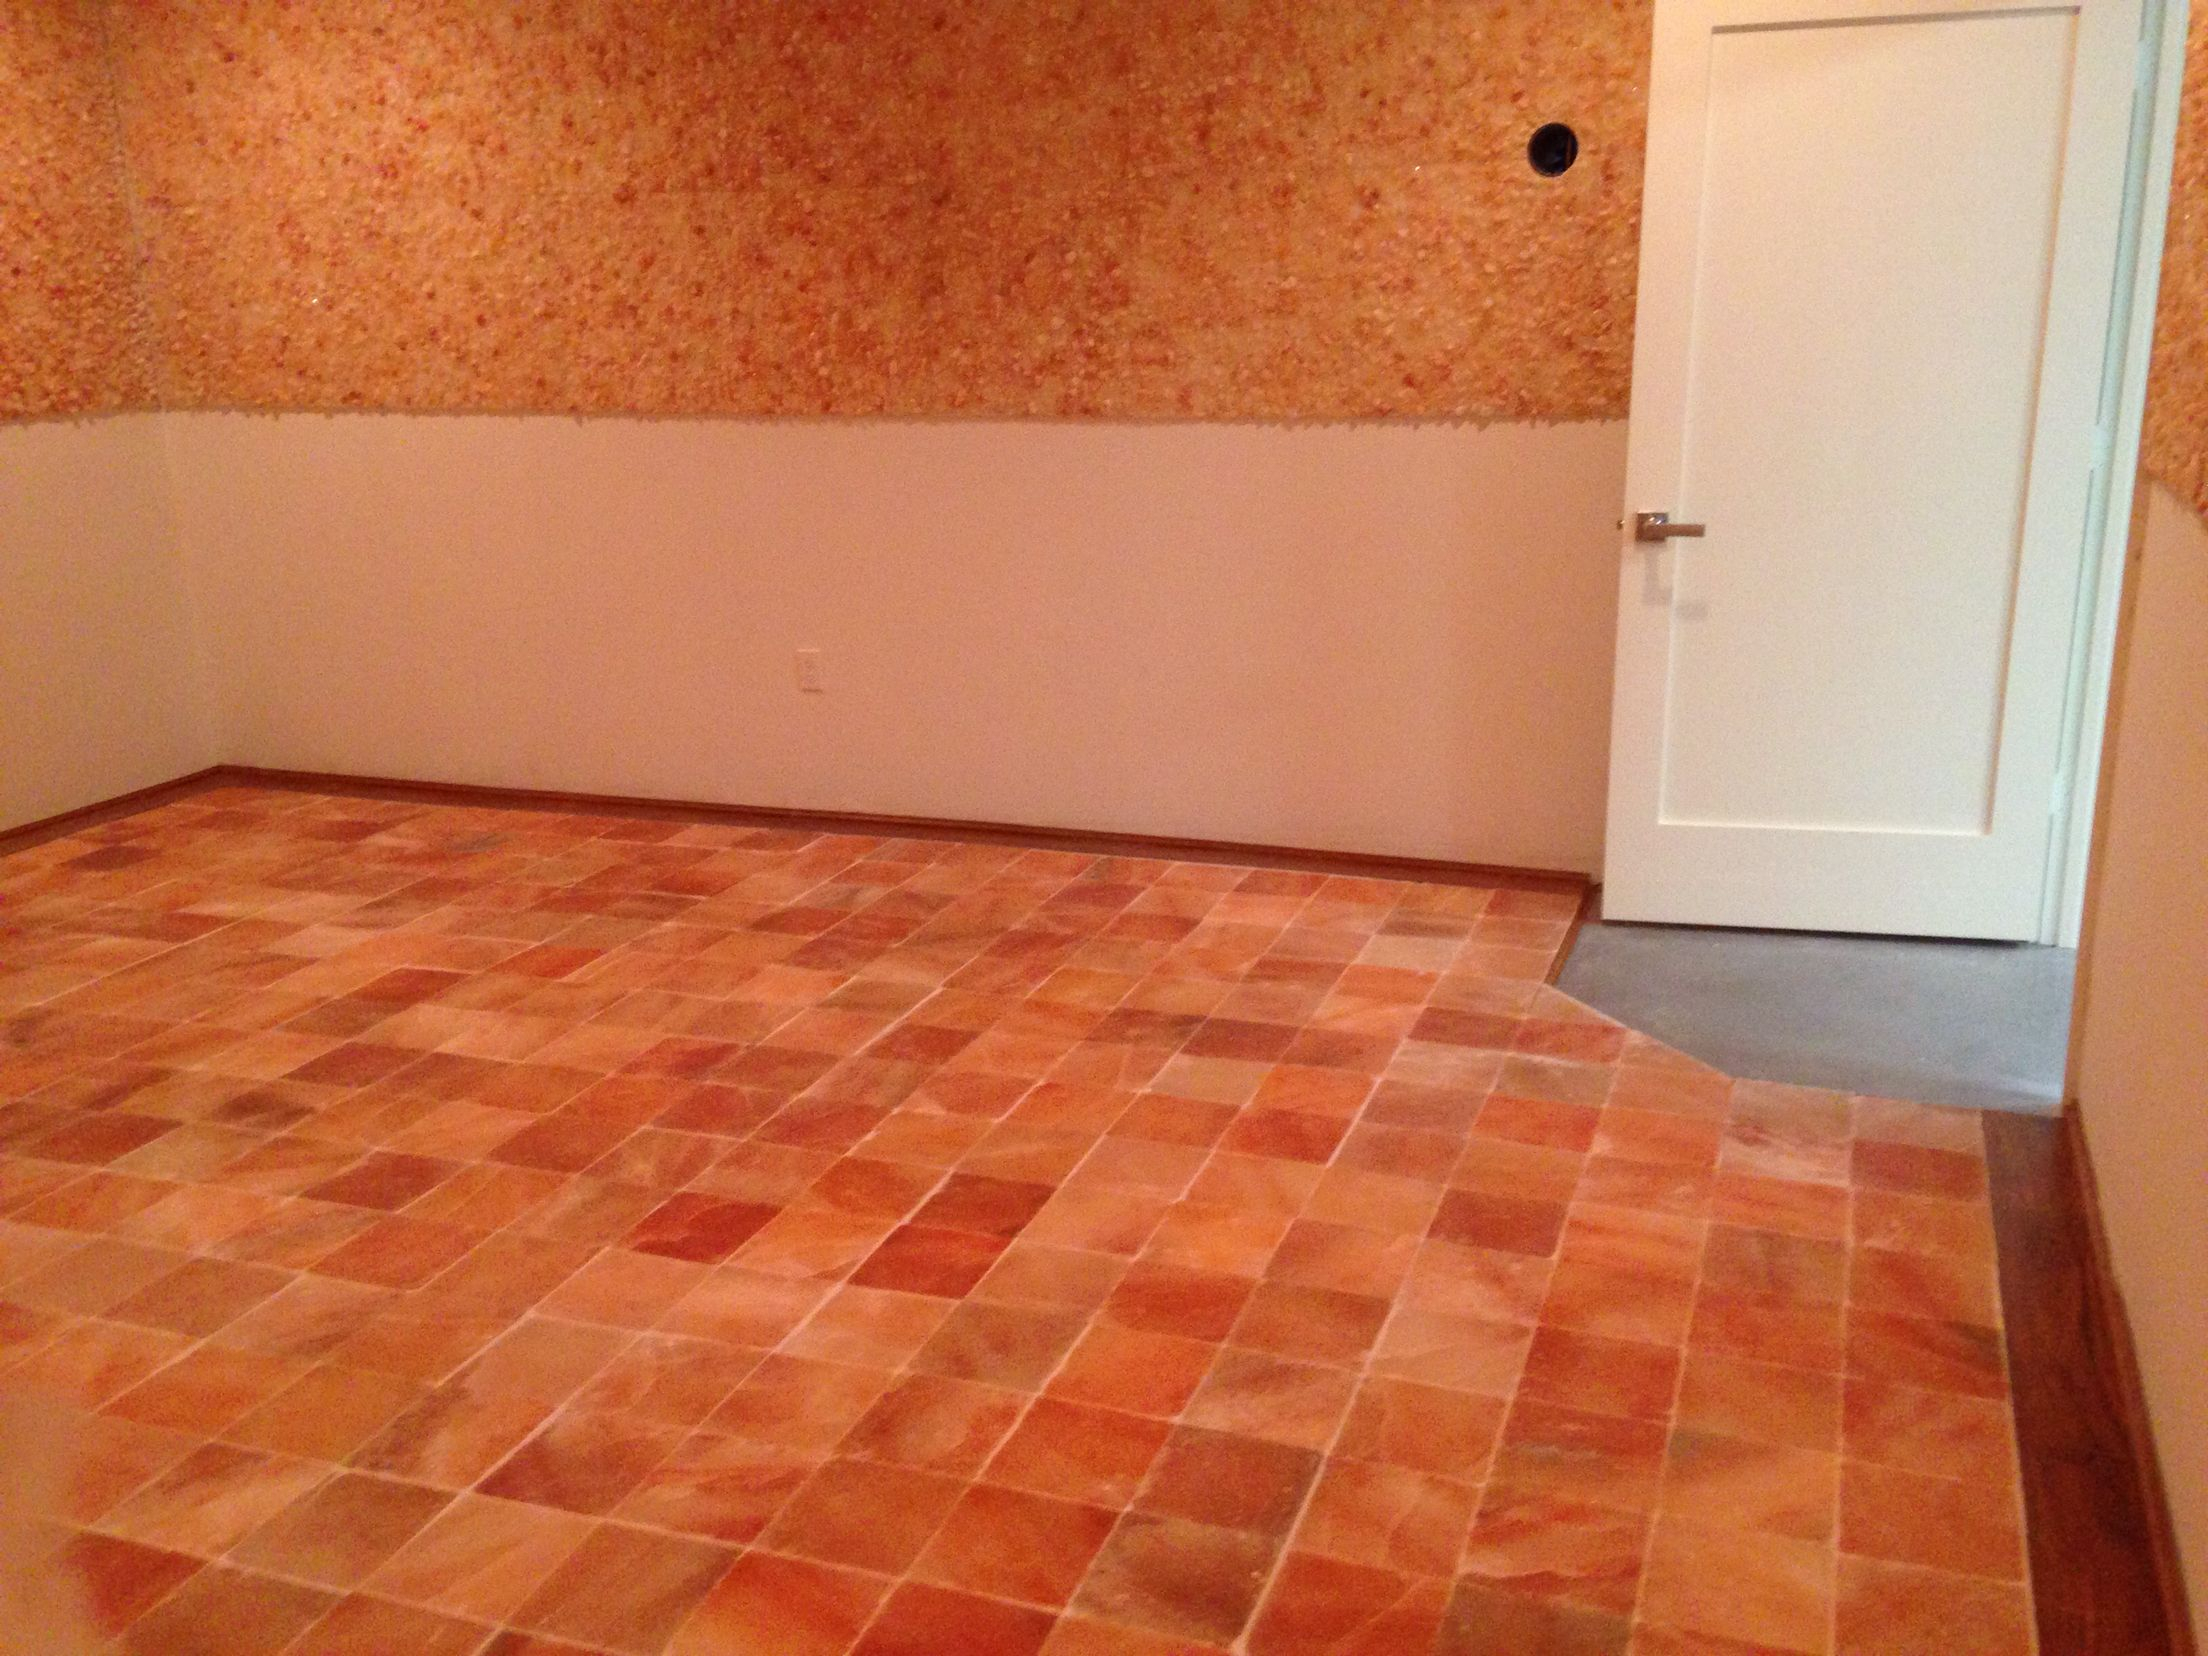 Pink Himalayan Salt Walls And Floors At The Salt Box intended for size 2208 X 1656